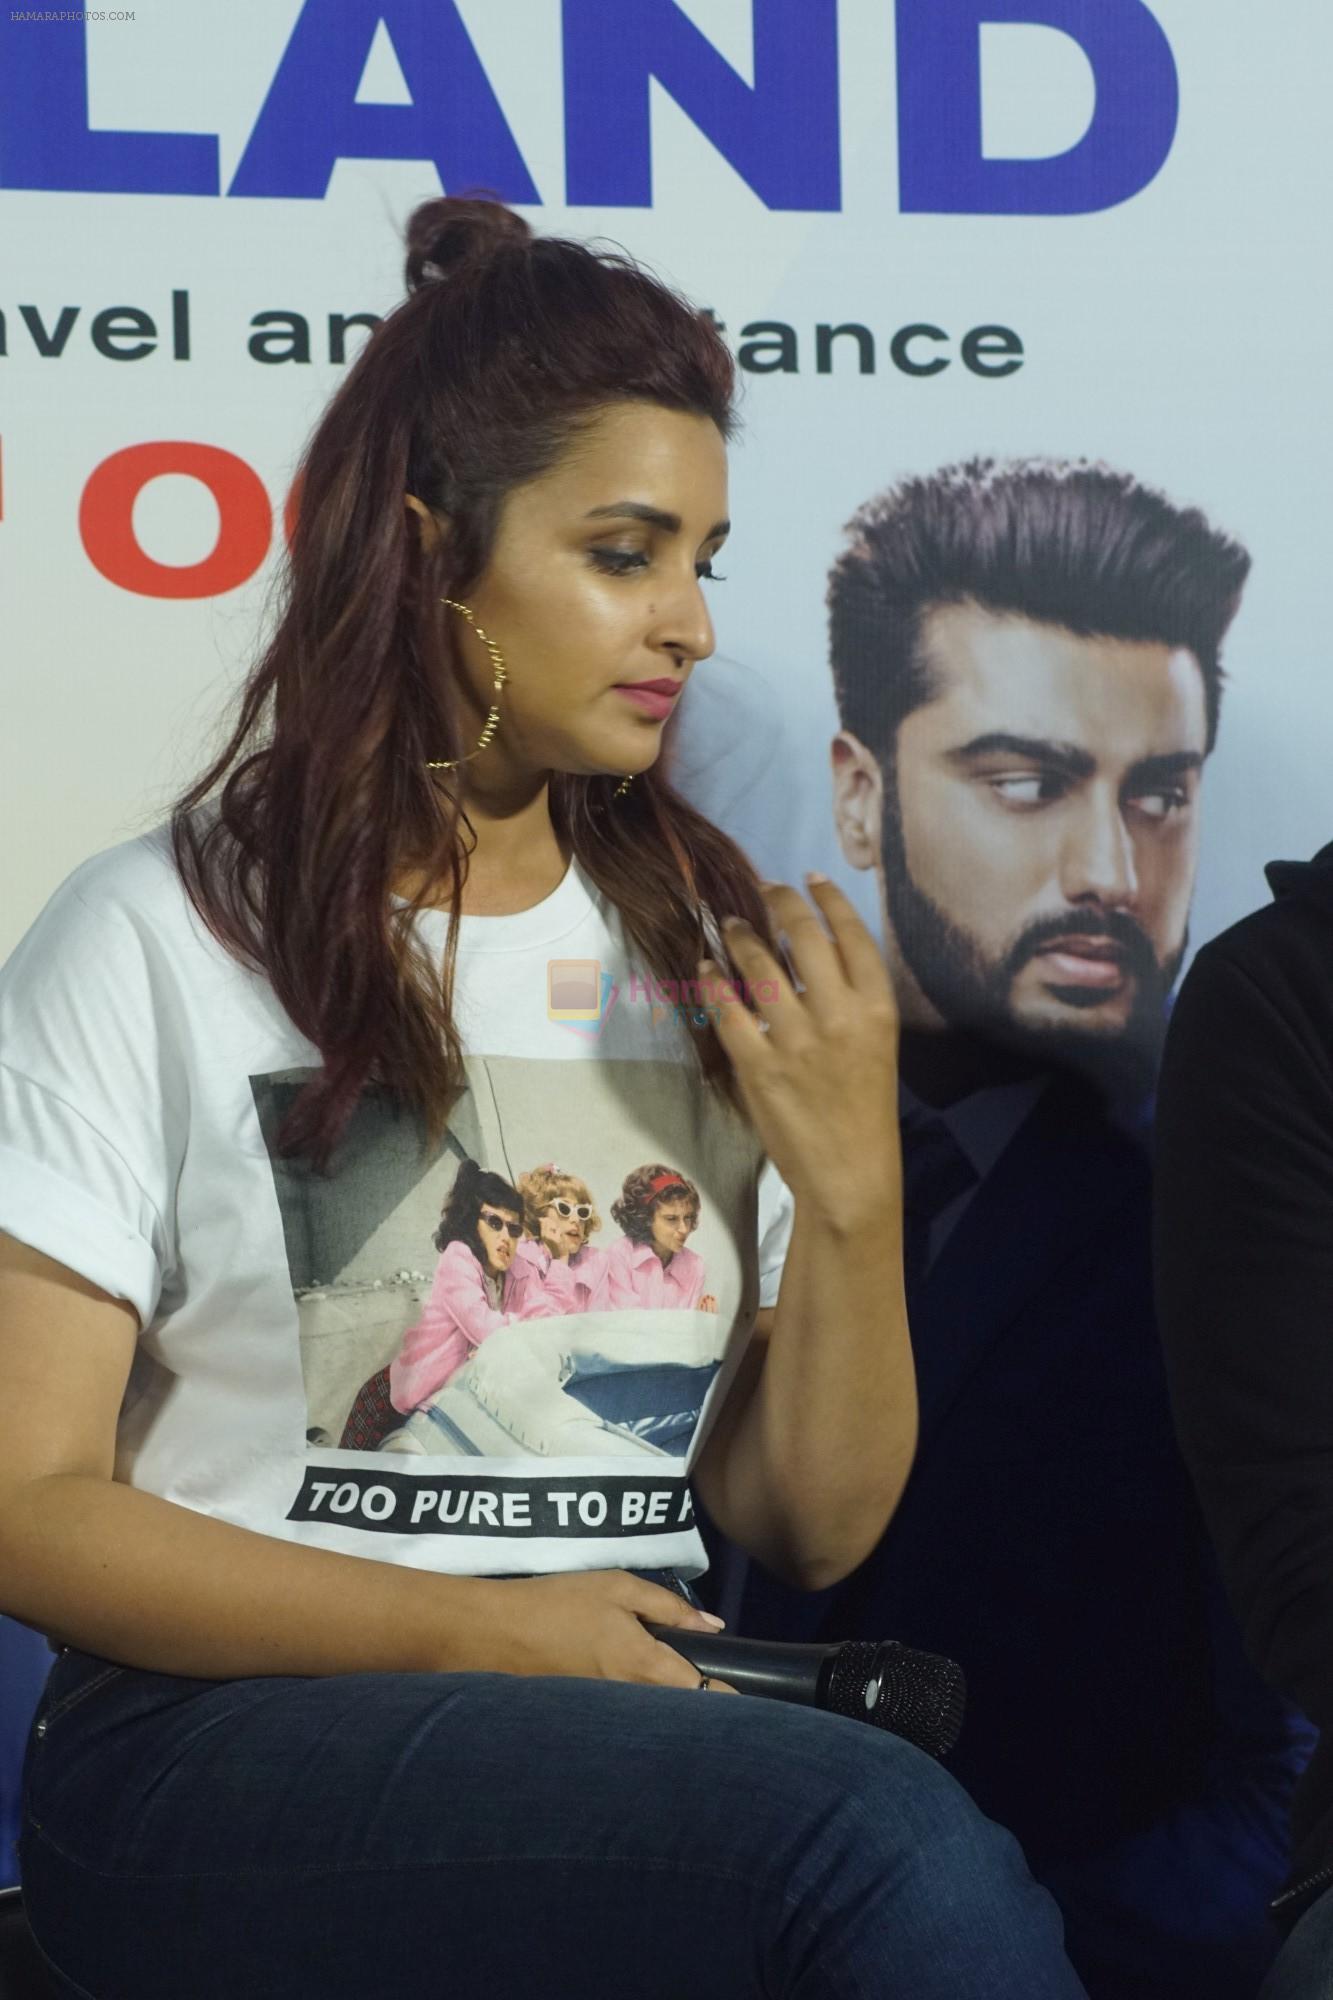 Parineeti Chopra At The Song Launch Of Proper Patola From Film Namaste England on 3rd Oct 2018